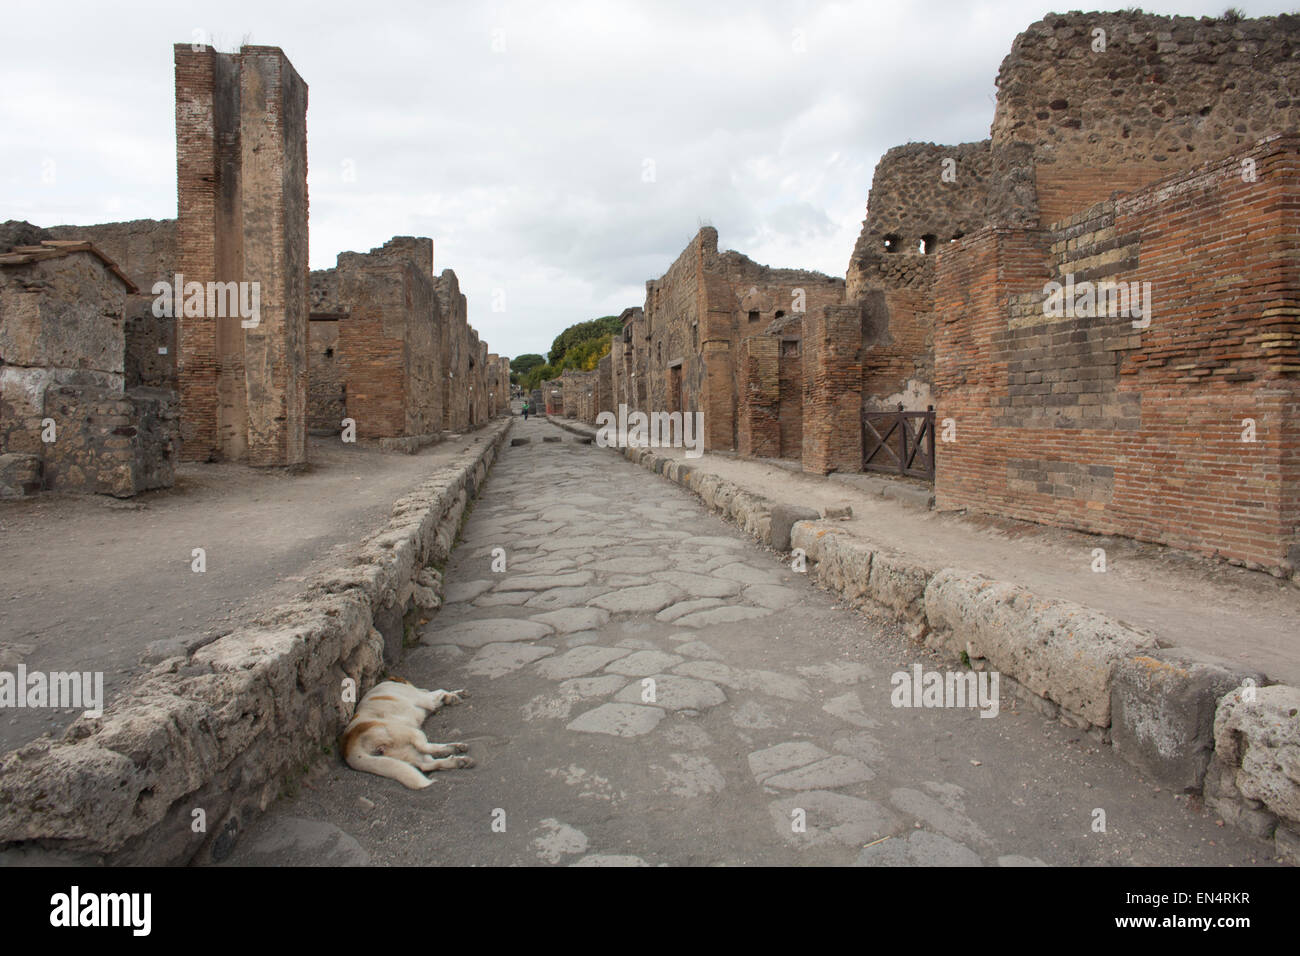 Almost 2,000 years ago, the city of pompeii was destroyed by an eruption of Mount Vesuvius. 20,000 residents of Pompeii and the 4,000 citizens of Herculaneum died. Stock Photo